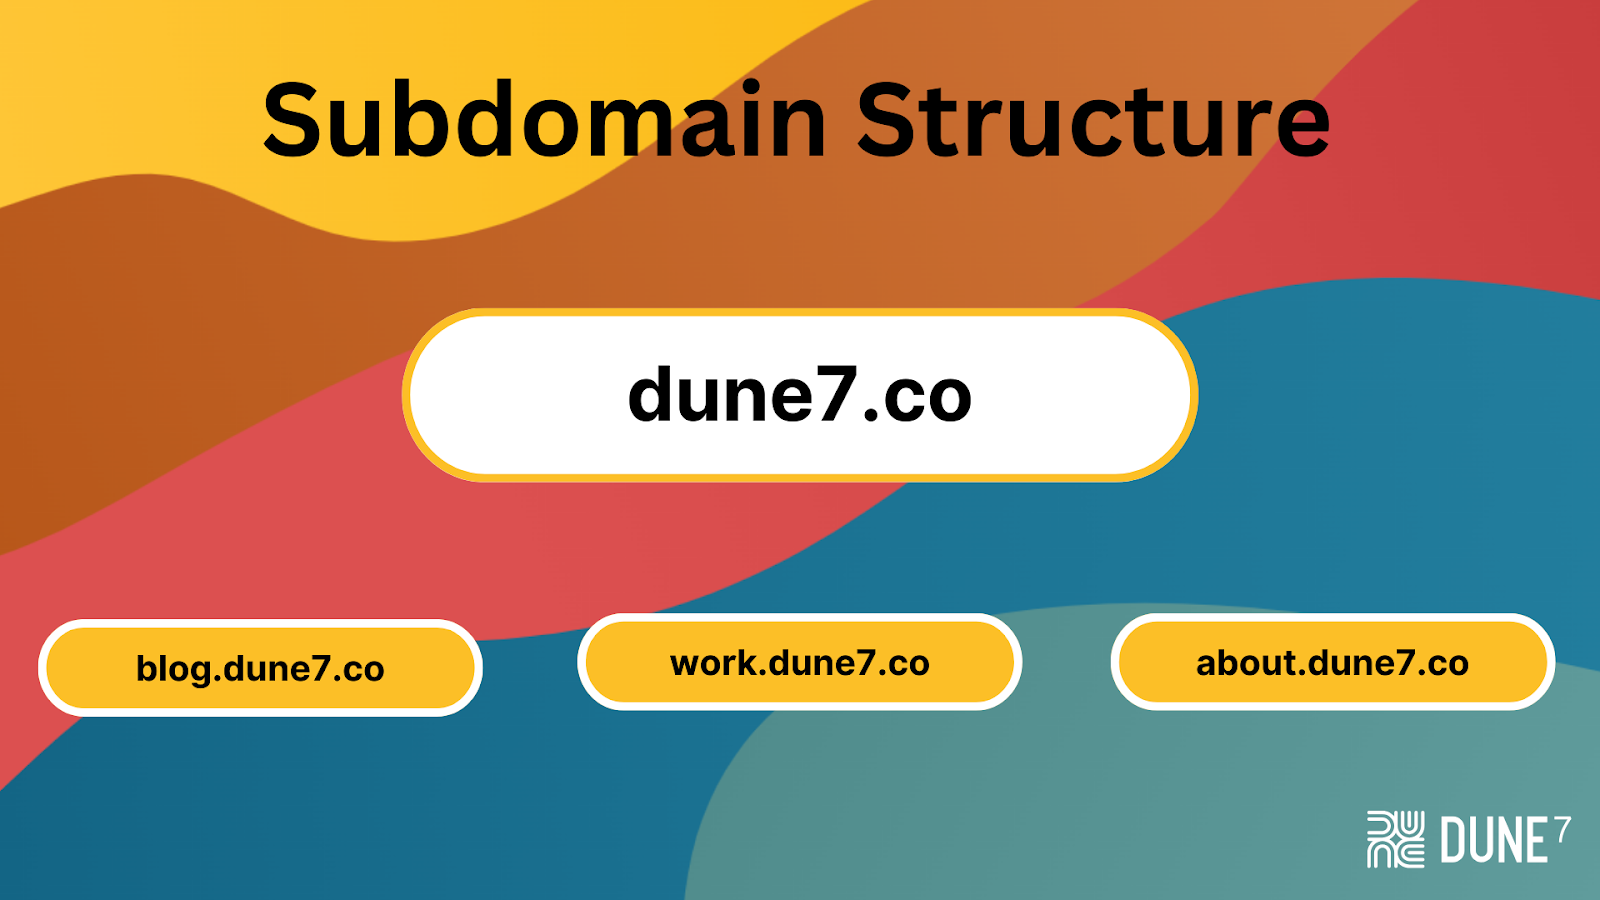 Subdomain structure graphic using dune7.co as example